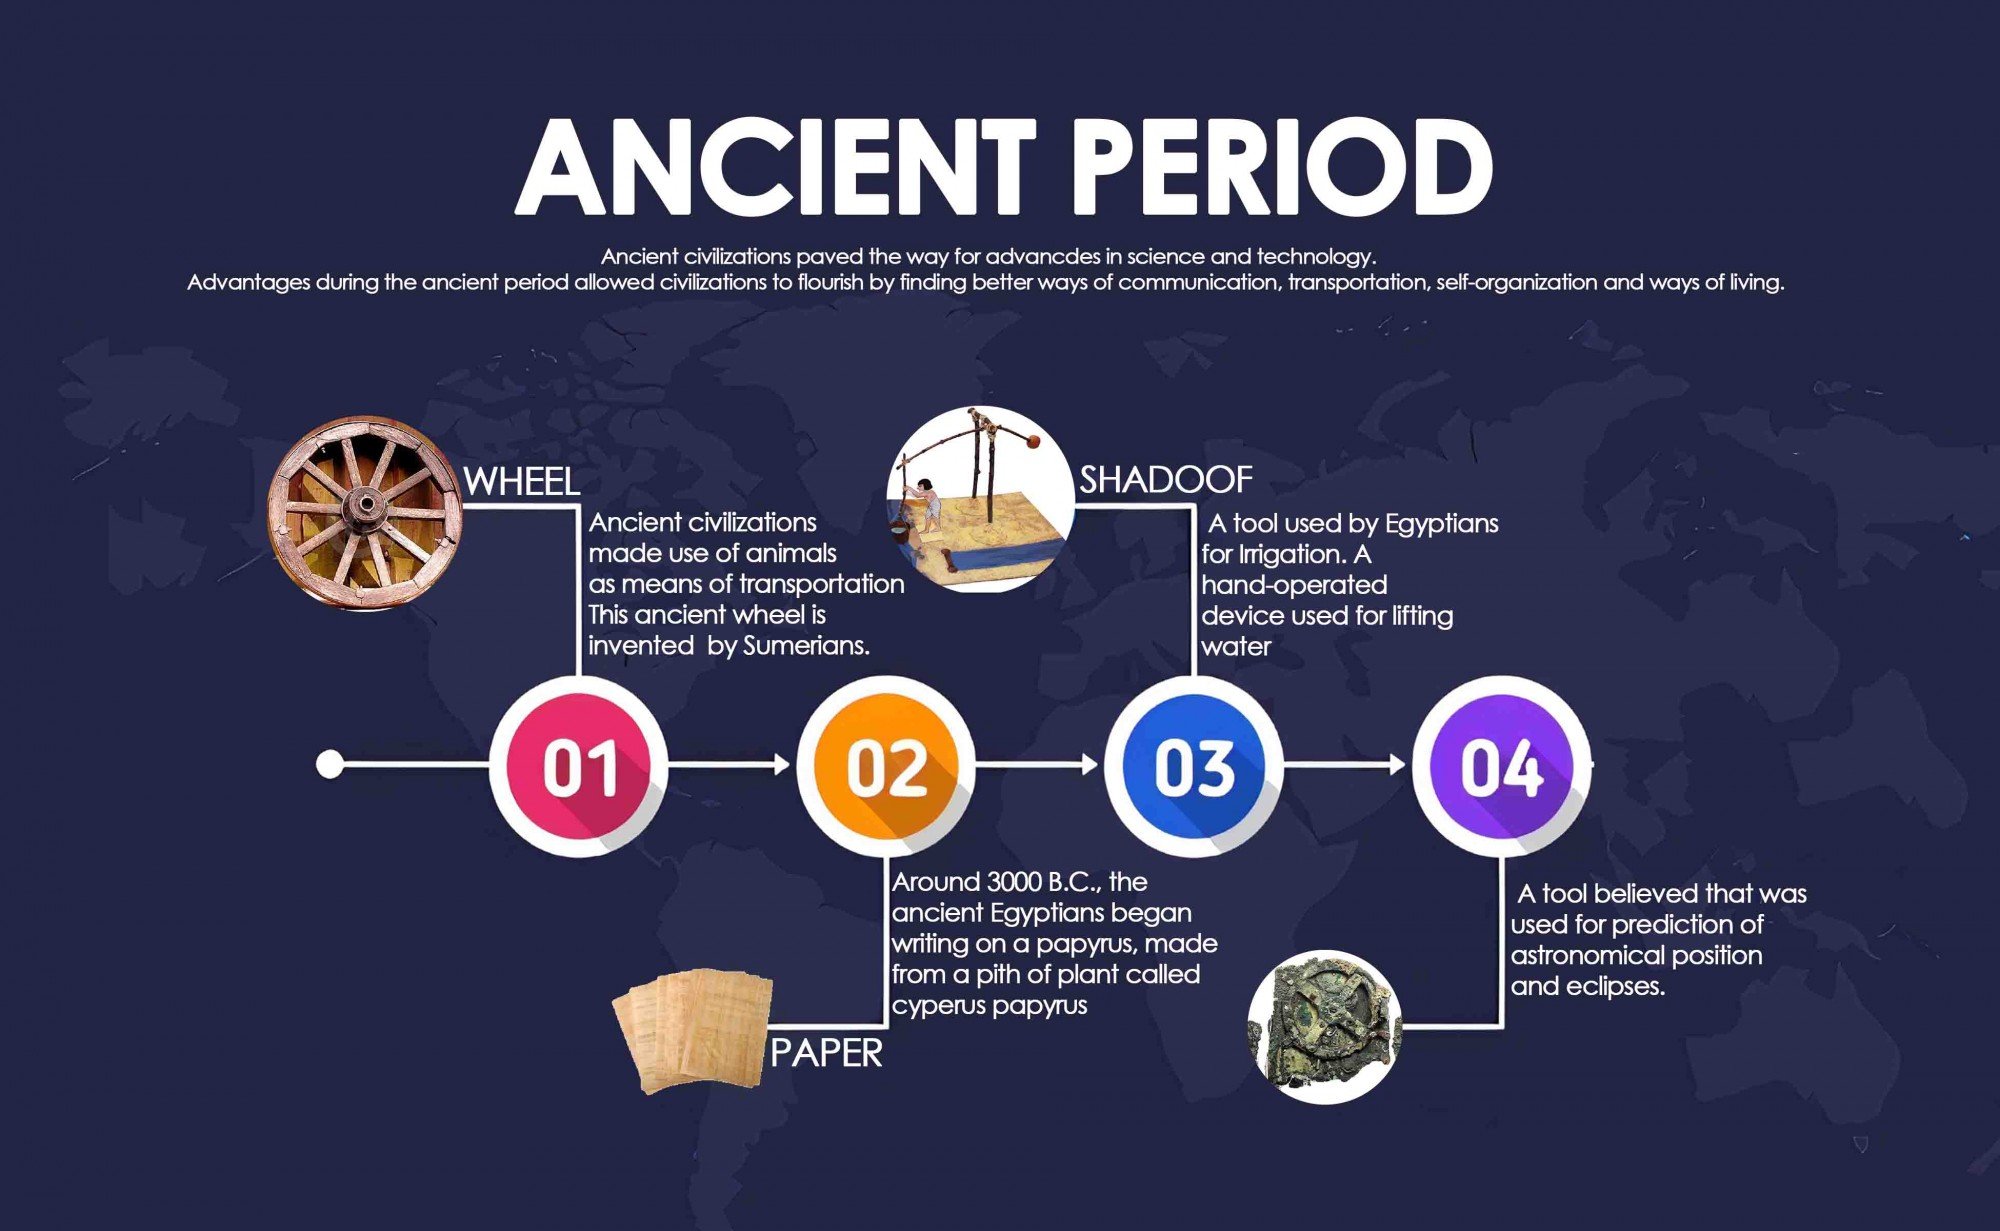 Historical Antecedents that Changed the Course of Science ...